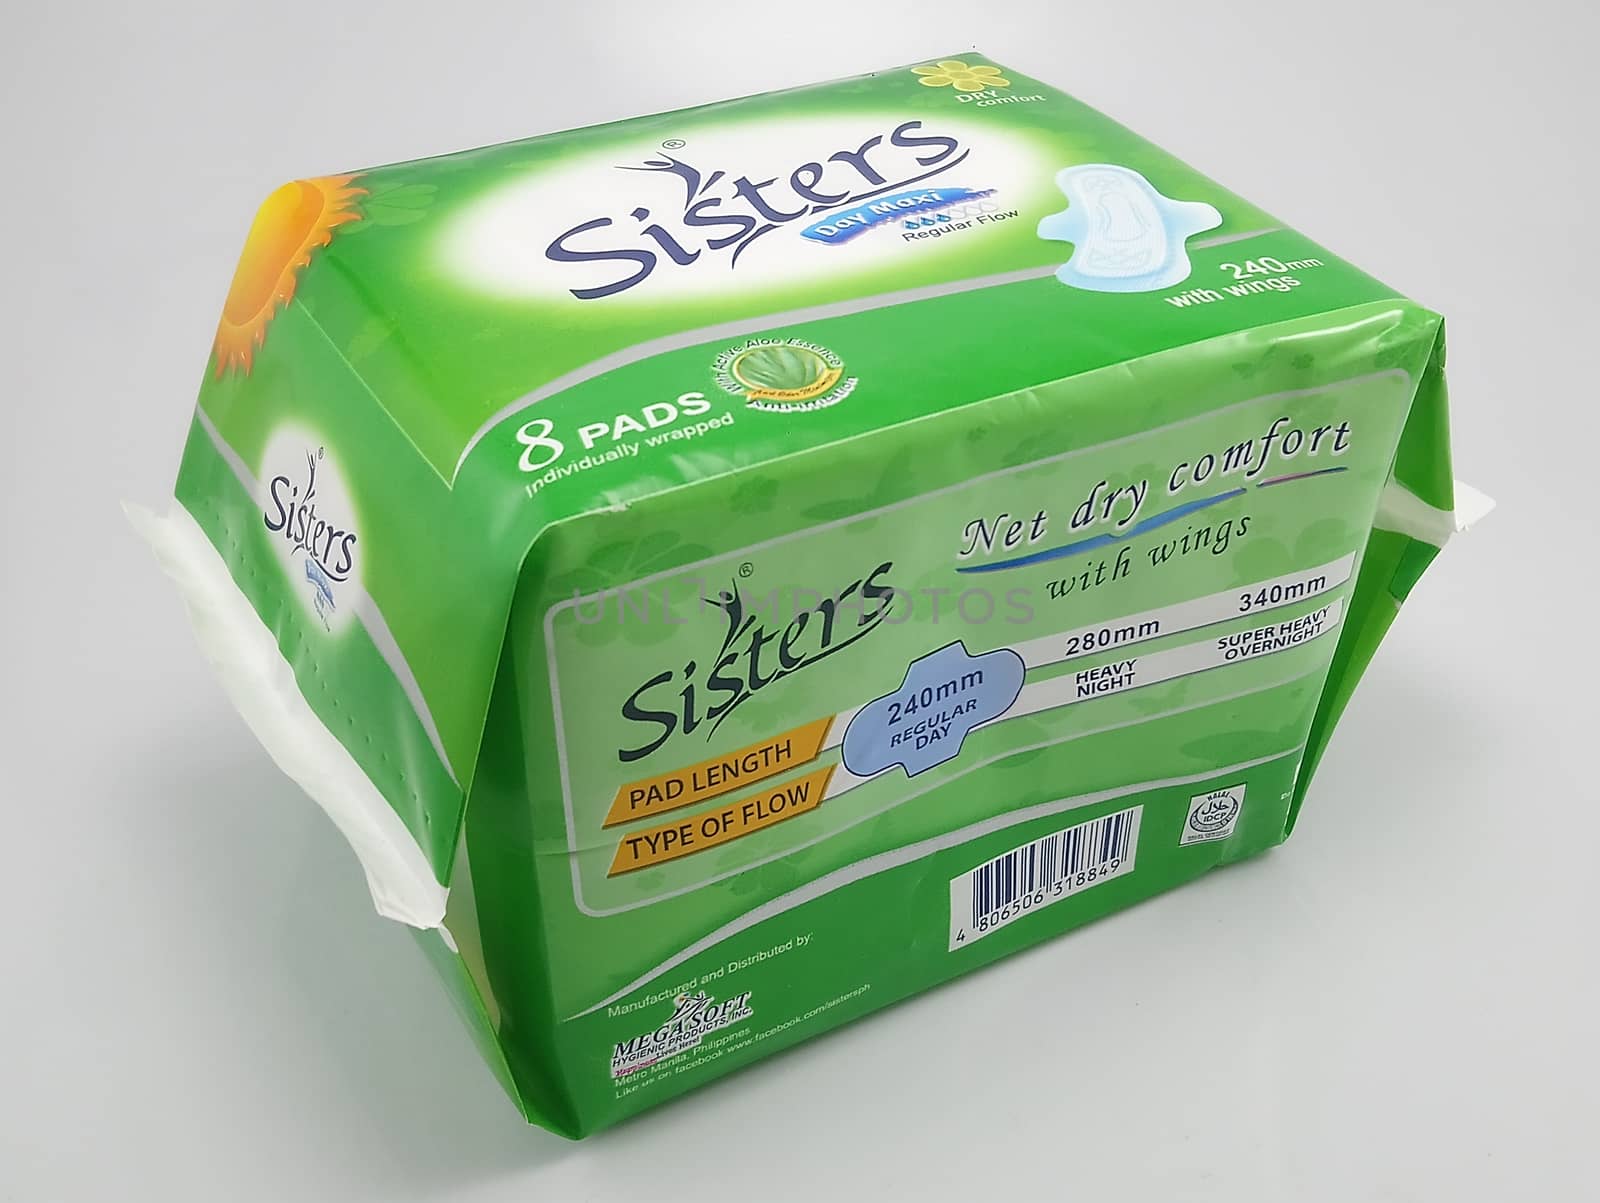 Sisters day maxi pads in Manila, Philippines by imwaltersy